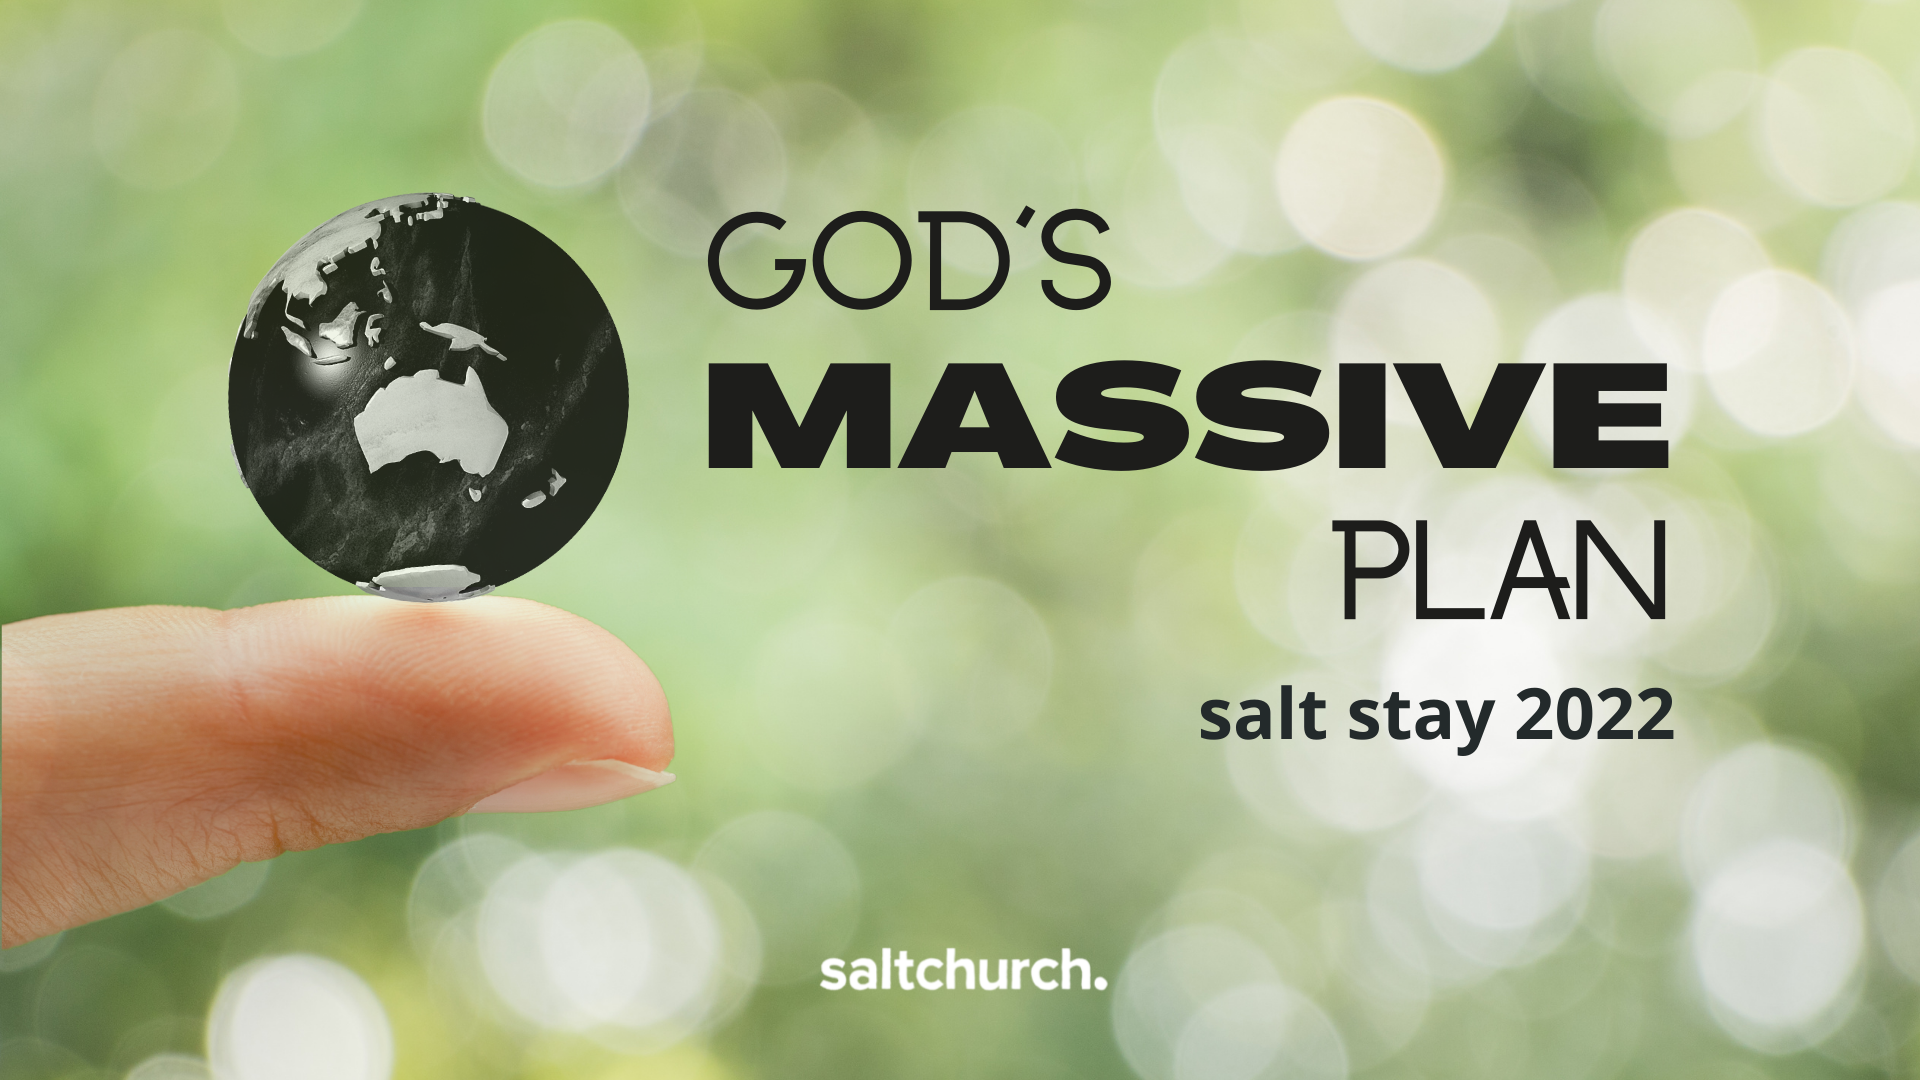 Session 3: Our part in God’s Massive Plan (Ephesians 5-6)